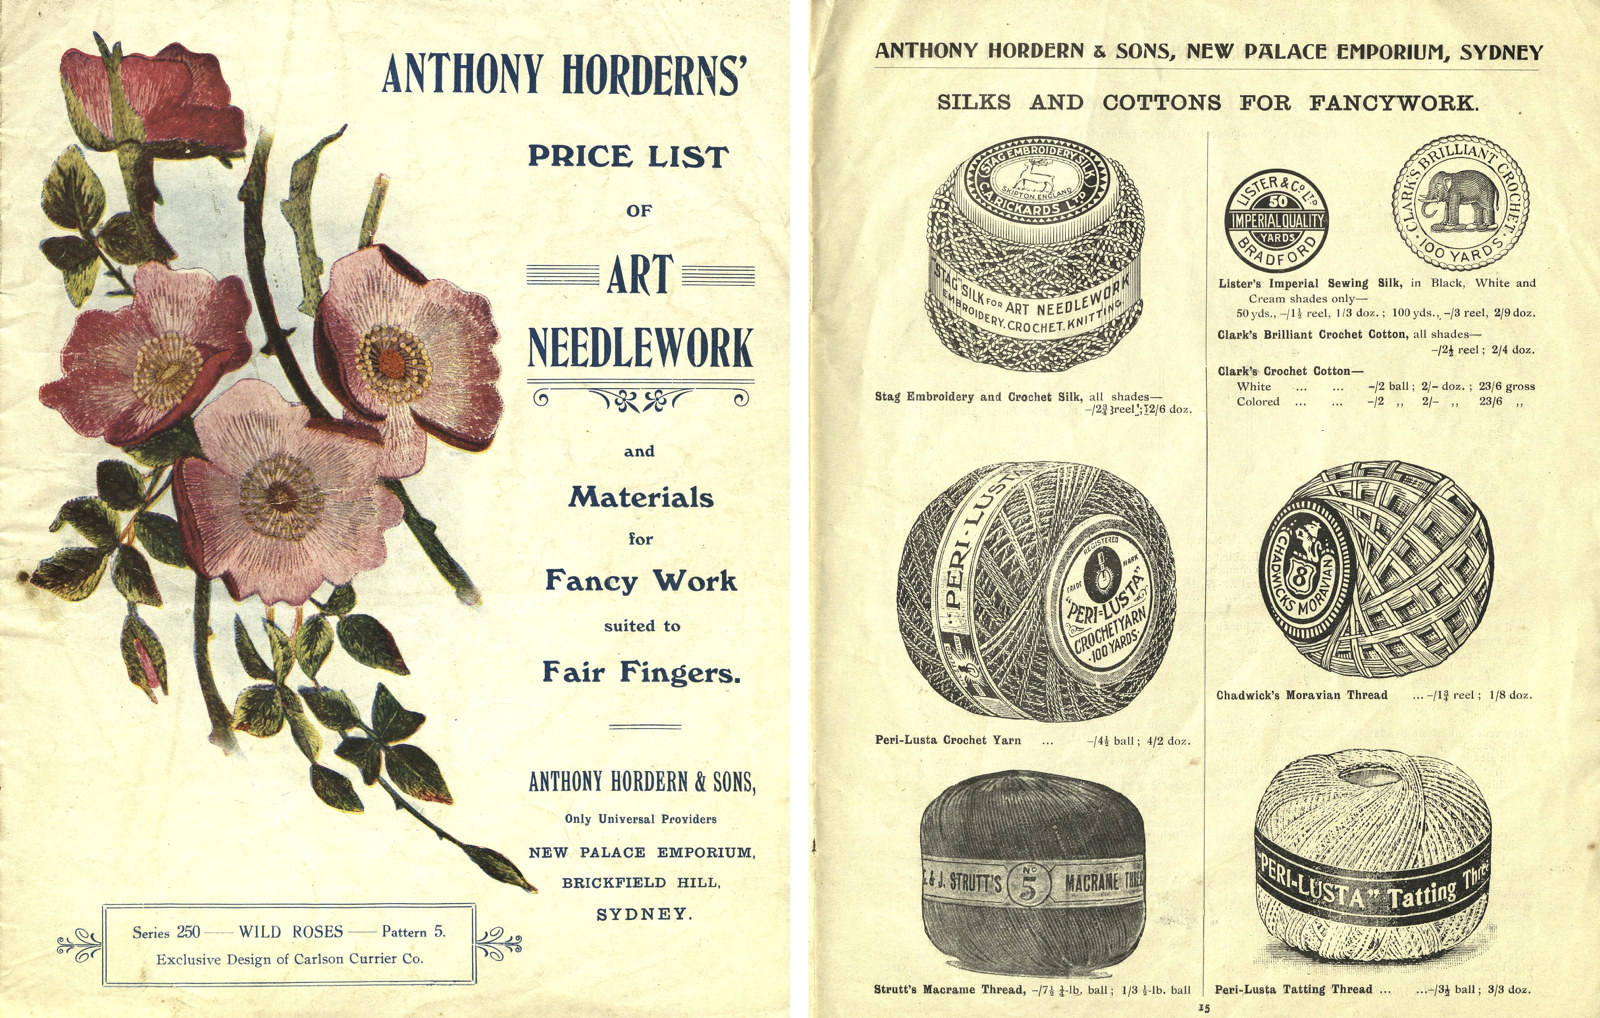 Anthony Horderns' price list of art needlework : and materials for fancy work suited to fair fingers